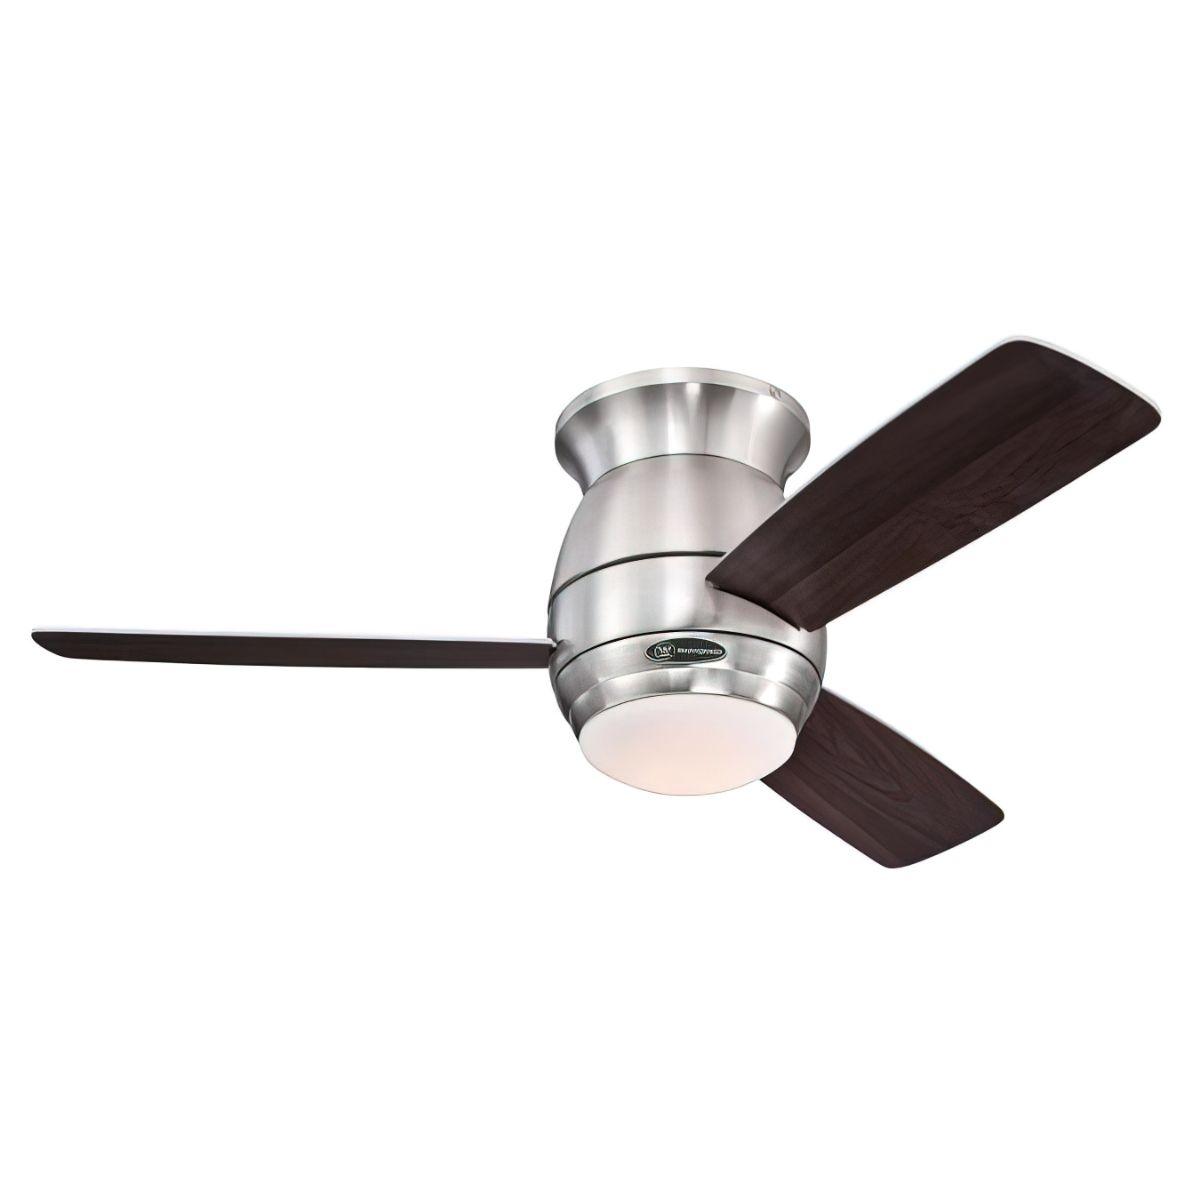 Halley 44 Inch Modern Outdoor Hugger Ceiling Fan With Light And Remote